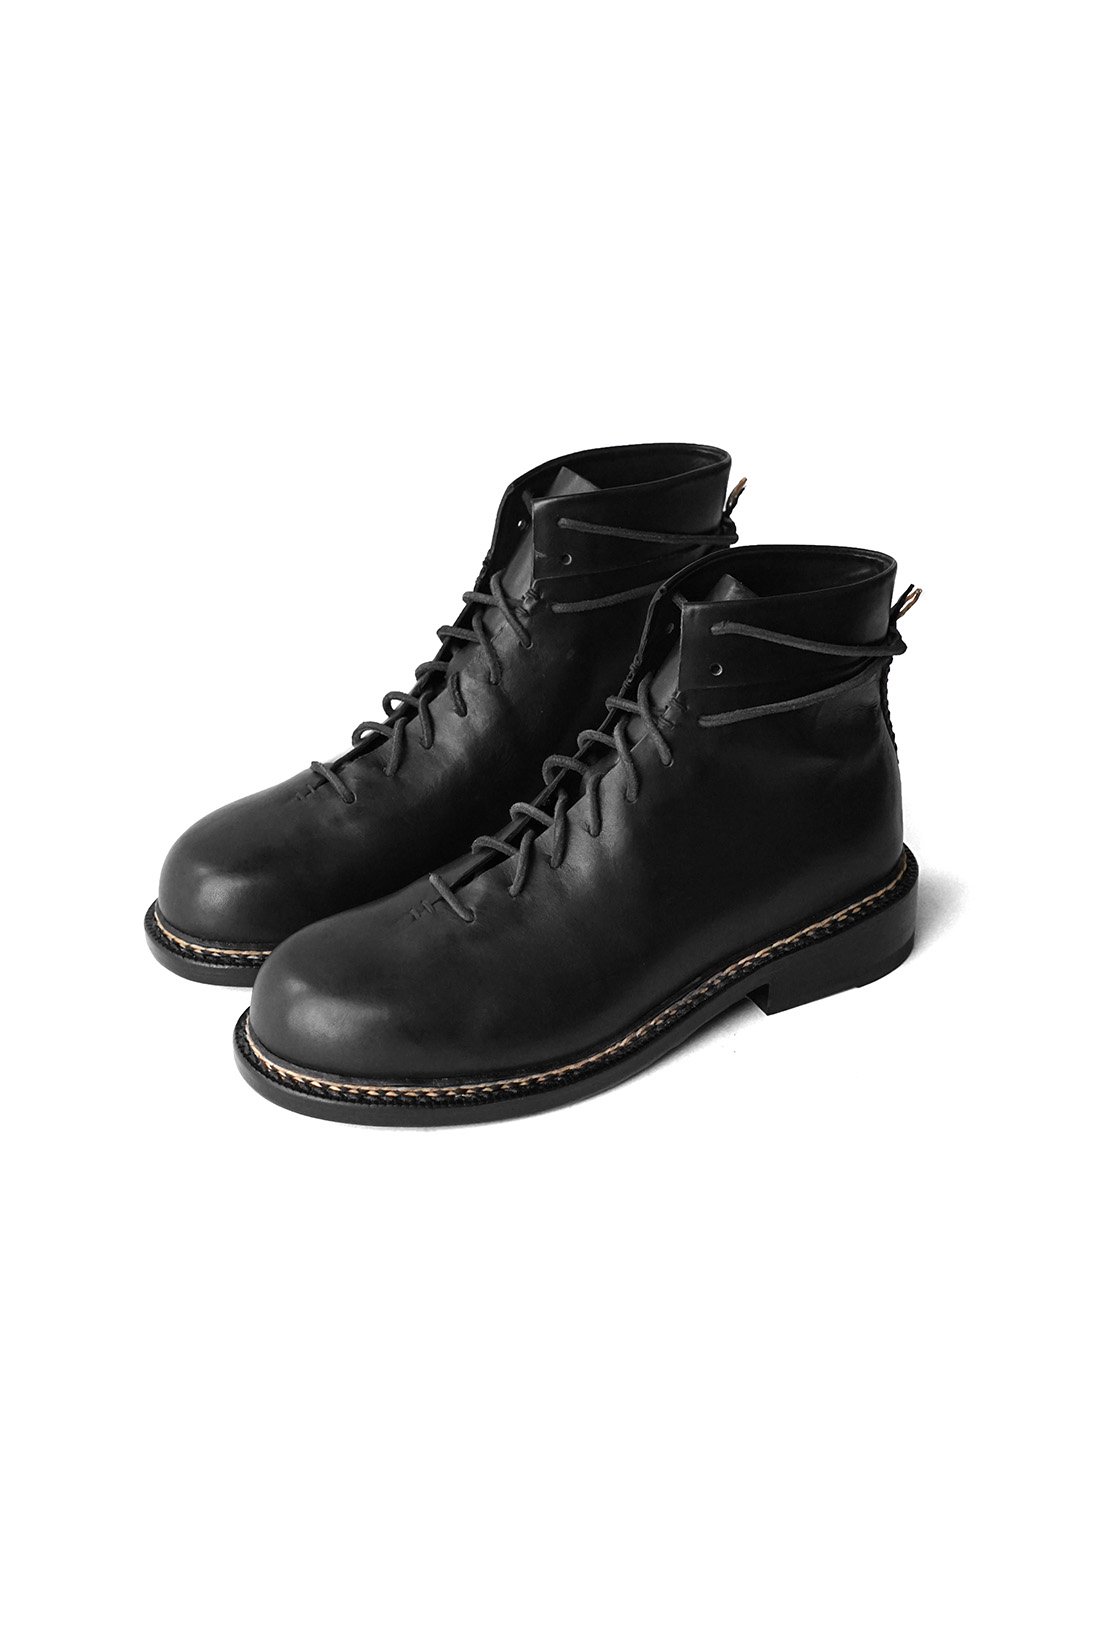 FEIT  - BRAIDED LACE UP BOOT - BLACK PHAETON EXCLUSIVE - PRICE 94,600 tax-in 